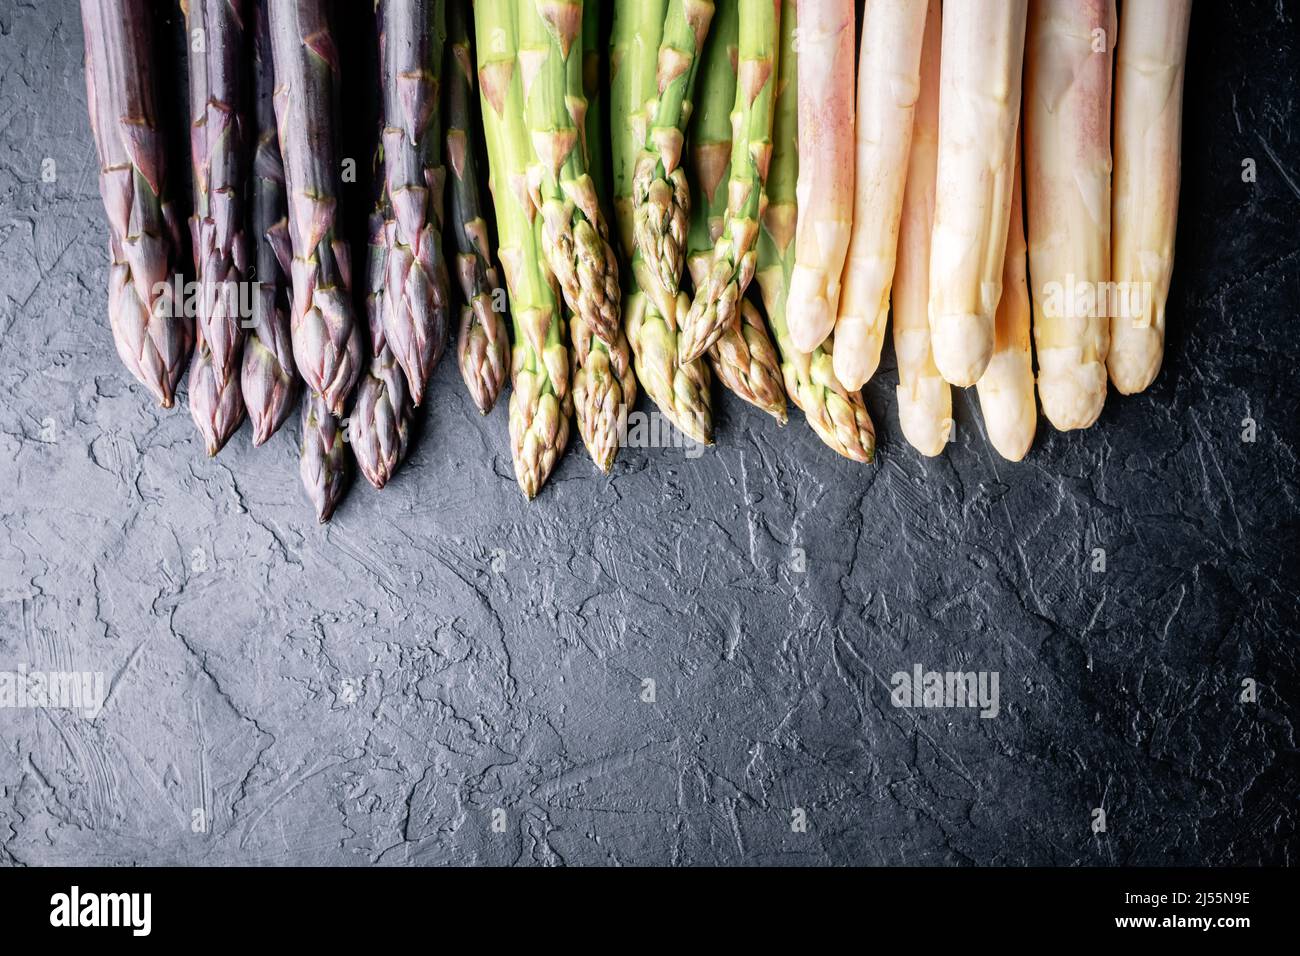 Green, purple and white asparagus sprouts on black board top view flat lay. Food photography Stock Photo